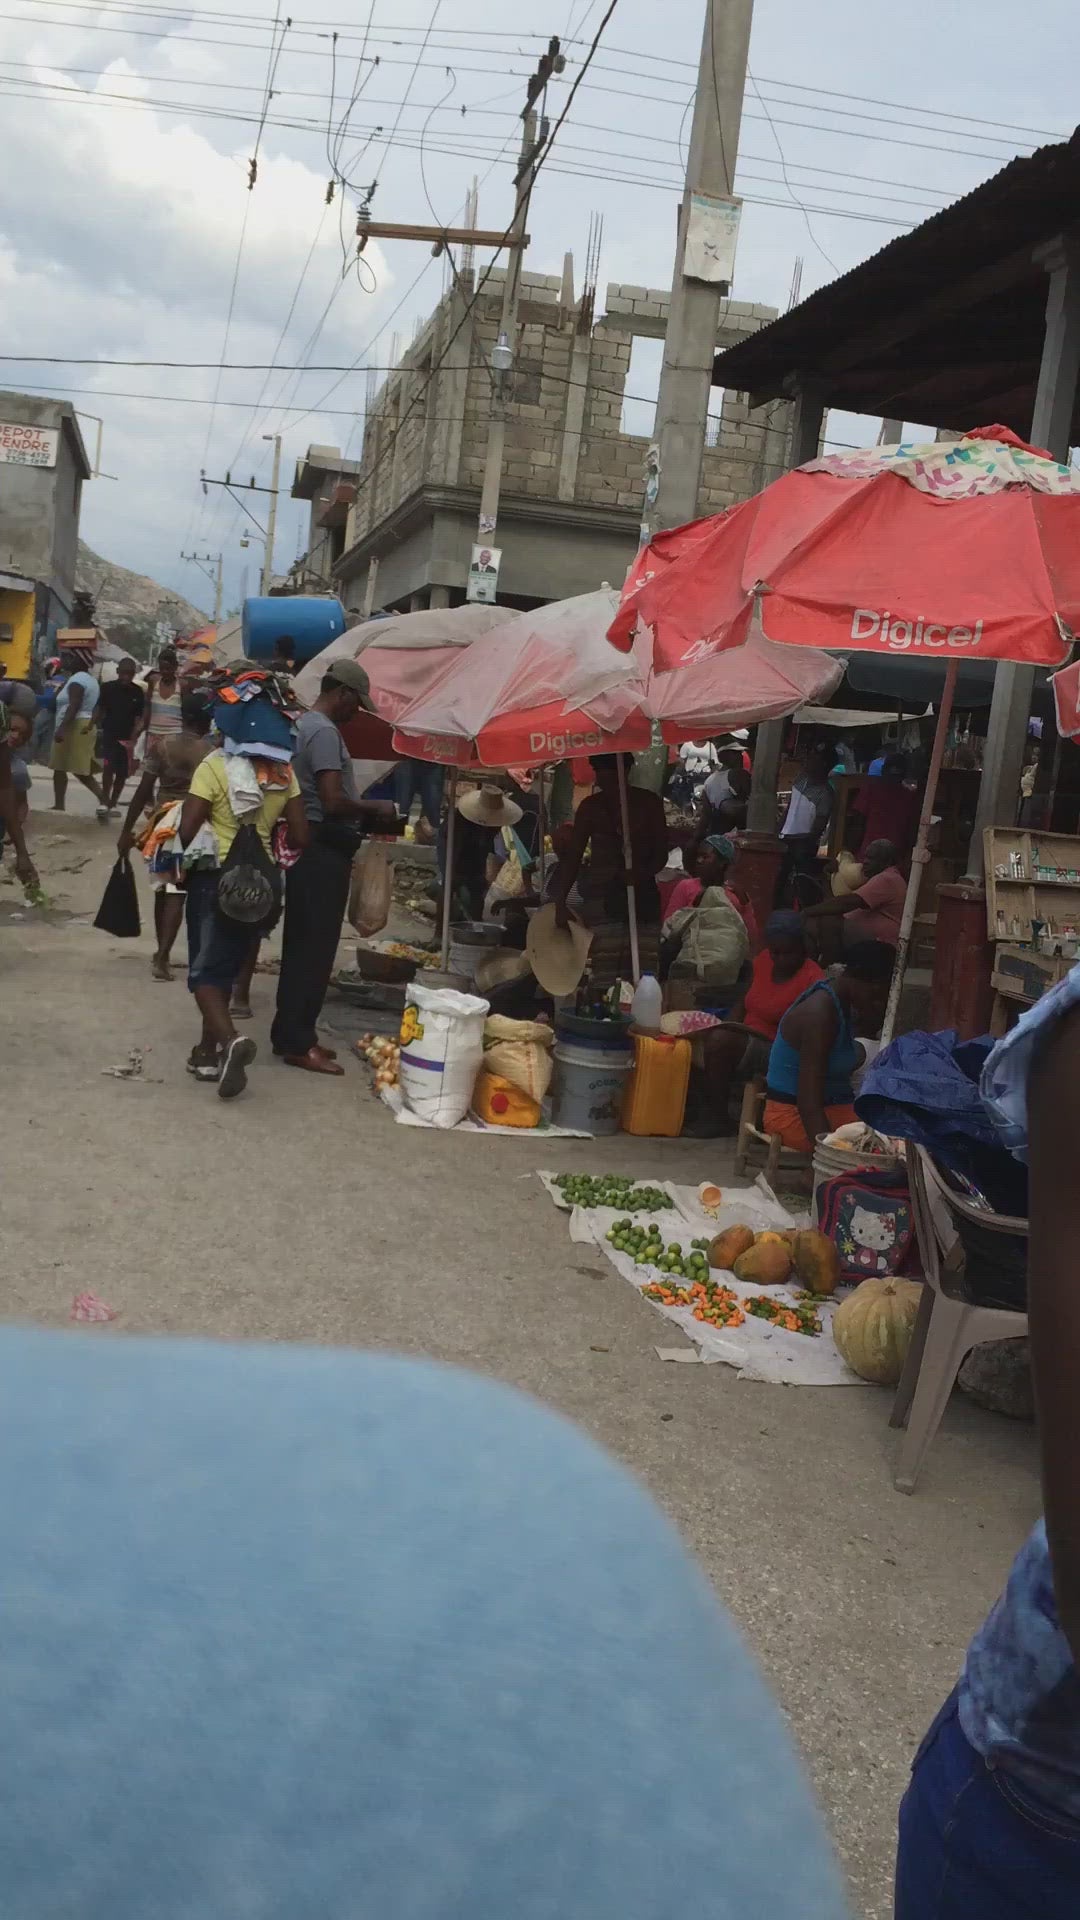 Busy Haitian market in Haiti, people selling and walking by